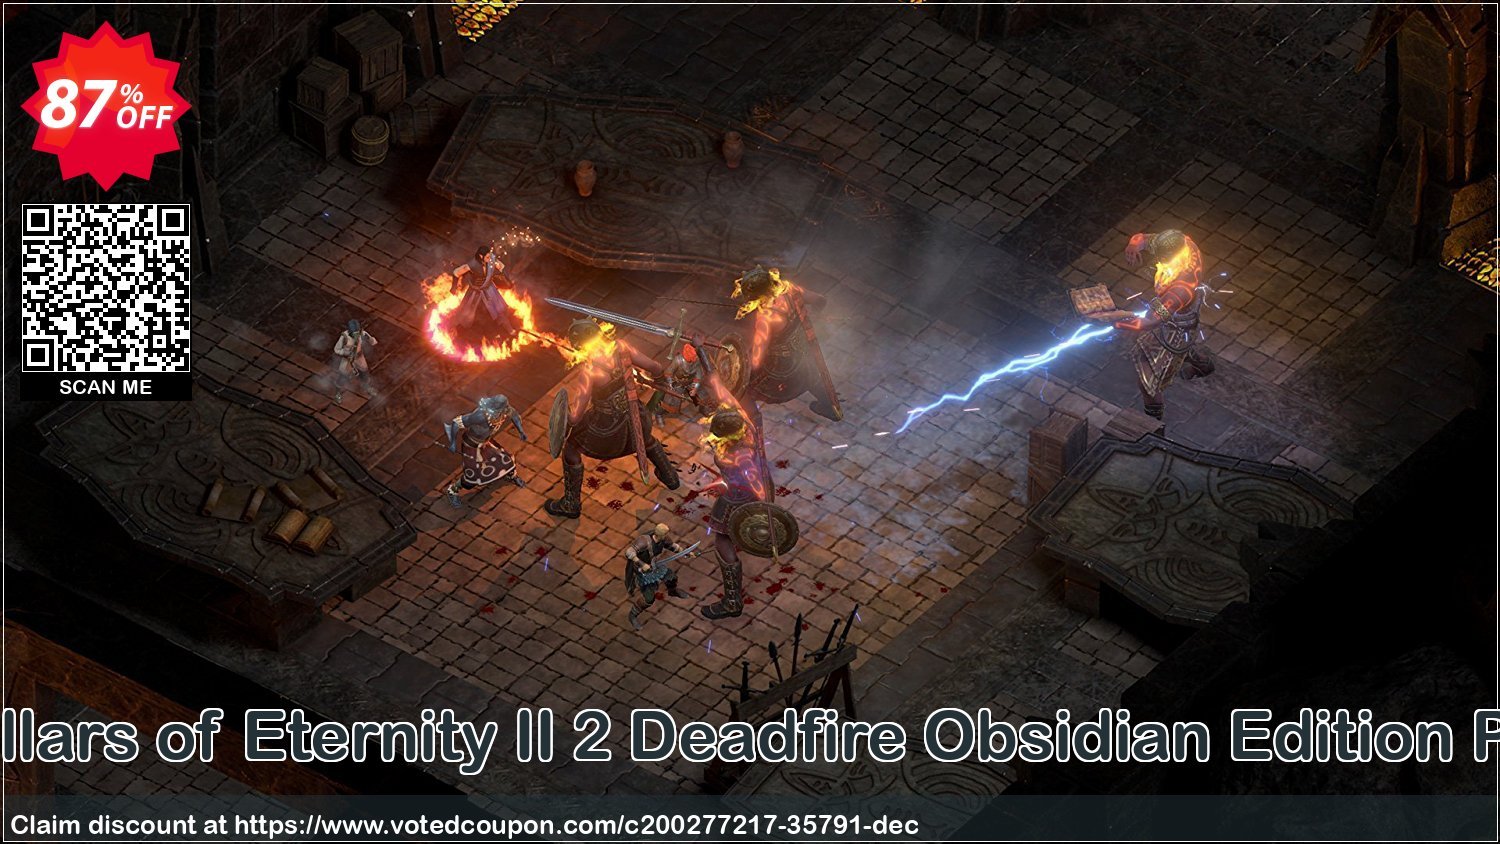 Pillars of Eternity II 2 Deadfire Obsidian Edition PC Coupon Code Apr 2024, 87% OFF - VotedCoupon